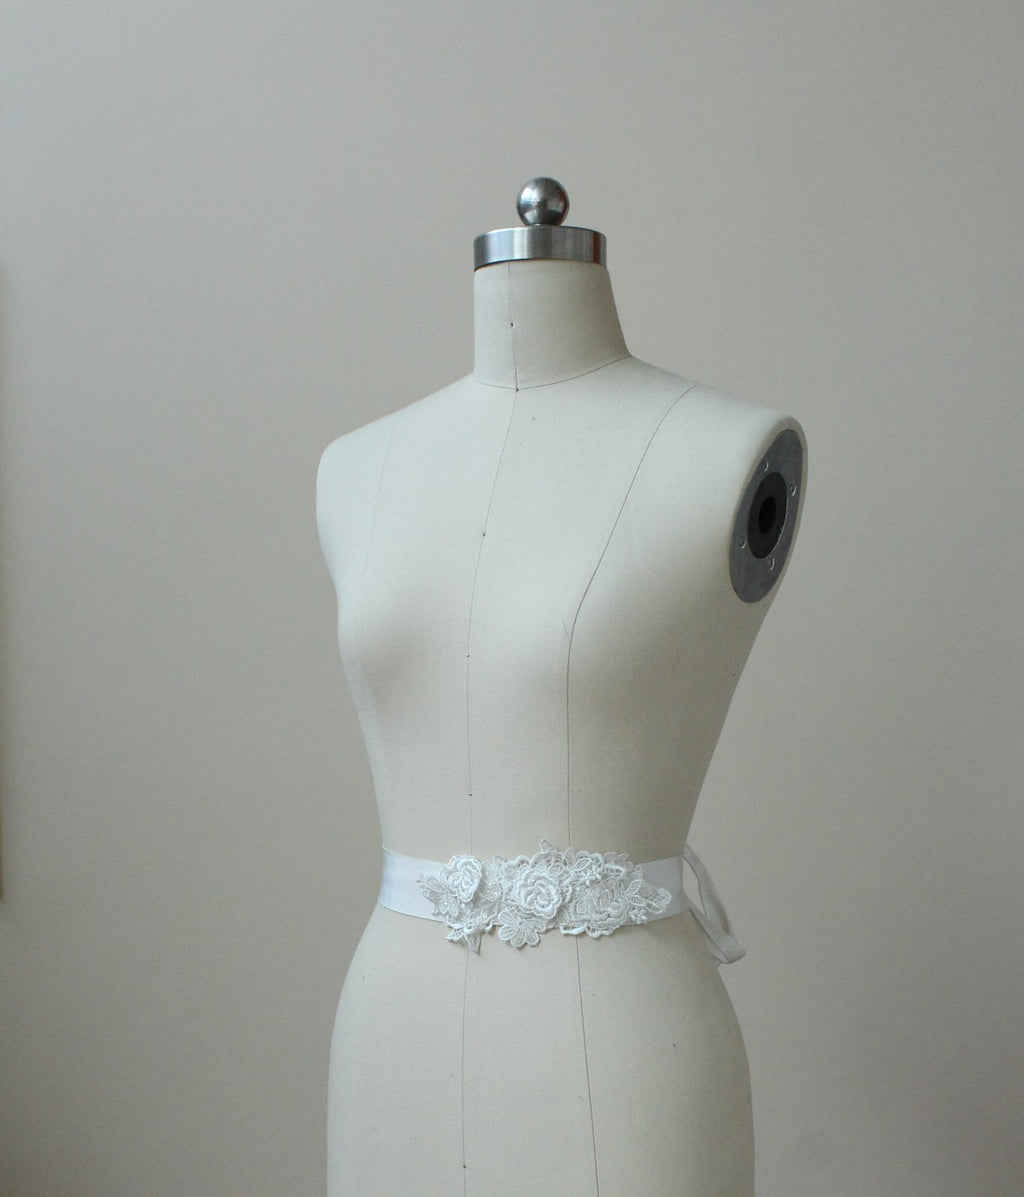 Style: MARLENE Embroidery Floral Lace Belt - Peony Rice